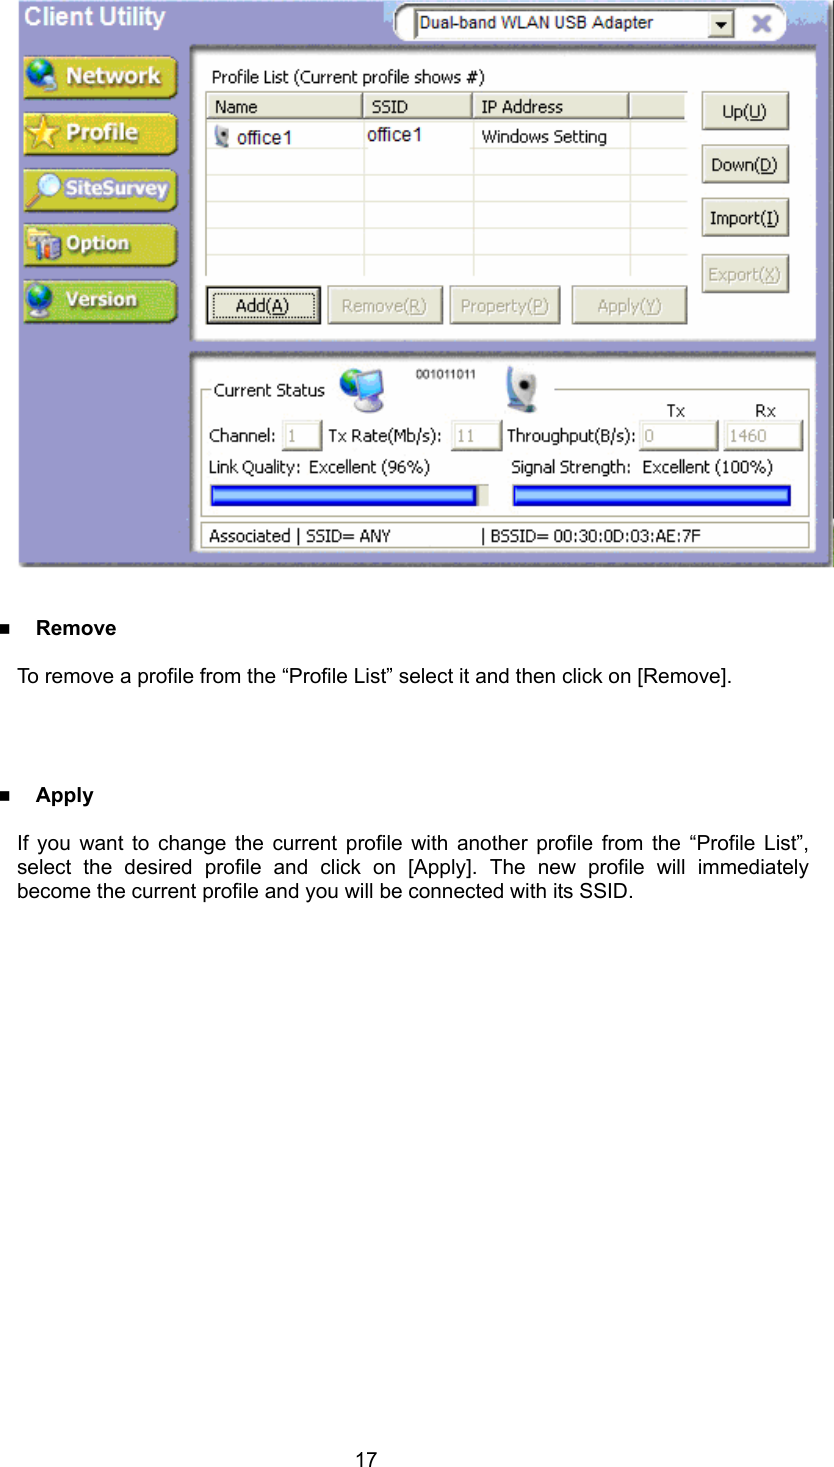  17    Remove  To remove a profile from the “Profile List” select it and then click on [Remove].      Apply  If you want to change the current profile with another profile from the “Profile List”, select the desired profile and click on [Apply]. The new profile will immediately become the current profile and you will be connected with its SSID.   